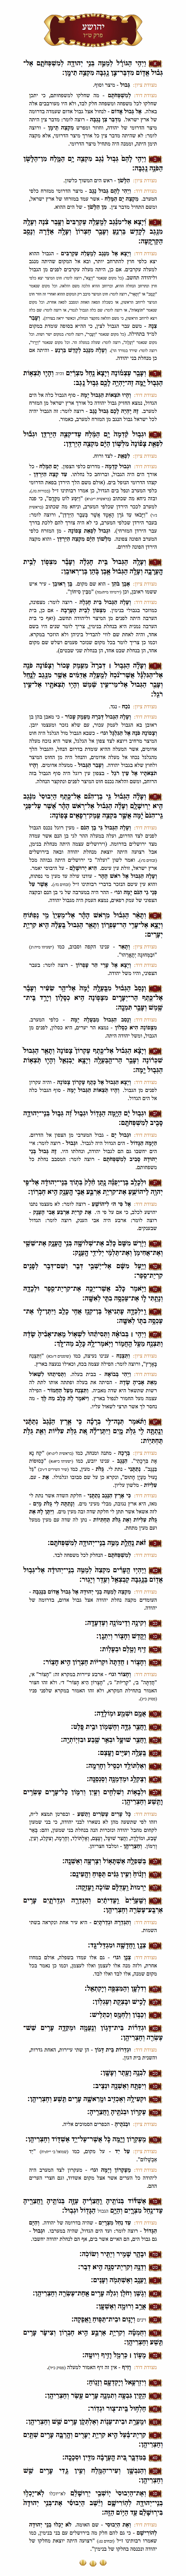 Sefer Yehoshua Chapter 15 with commentary